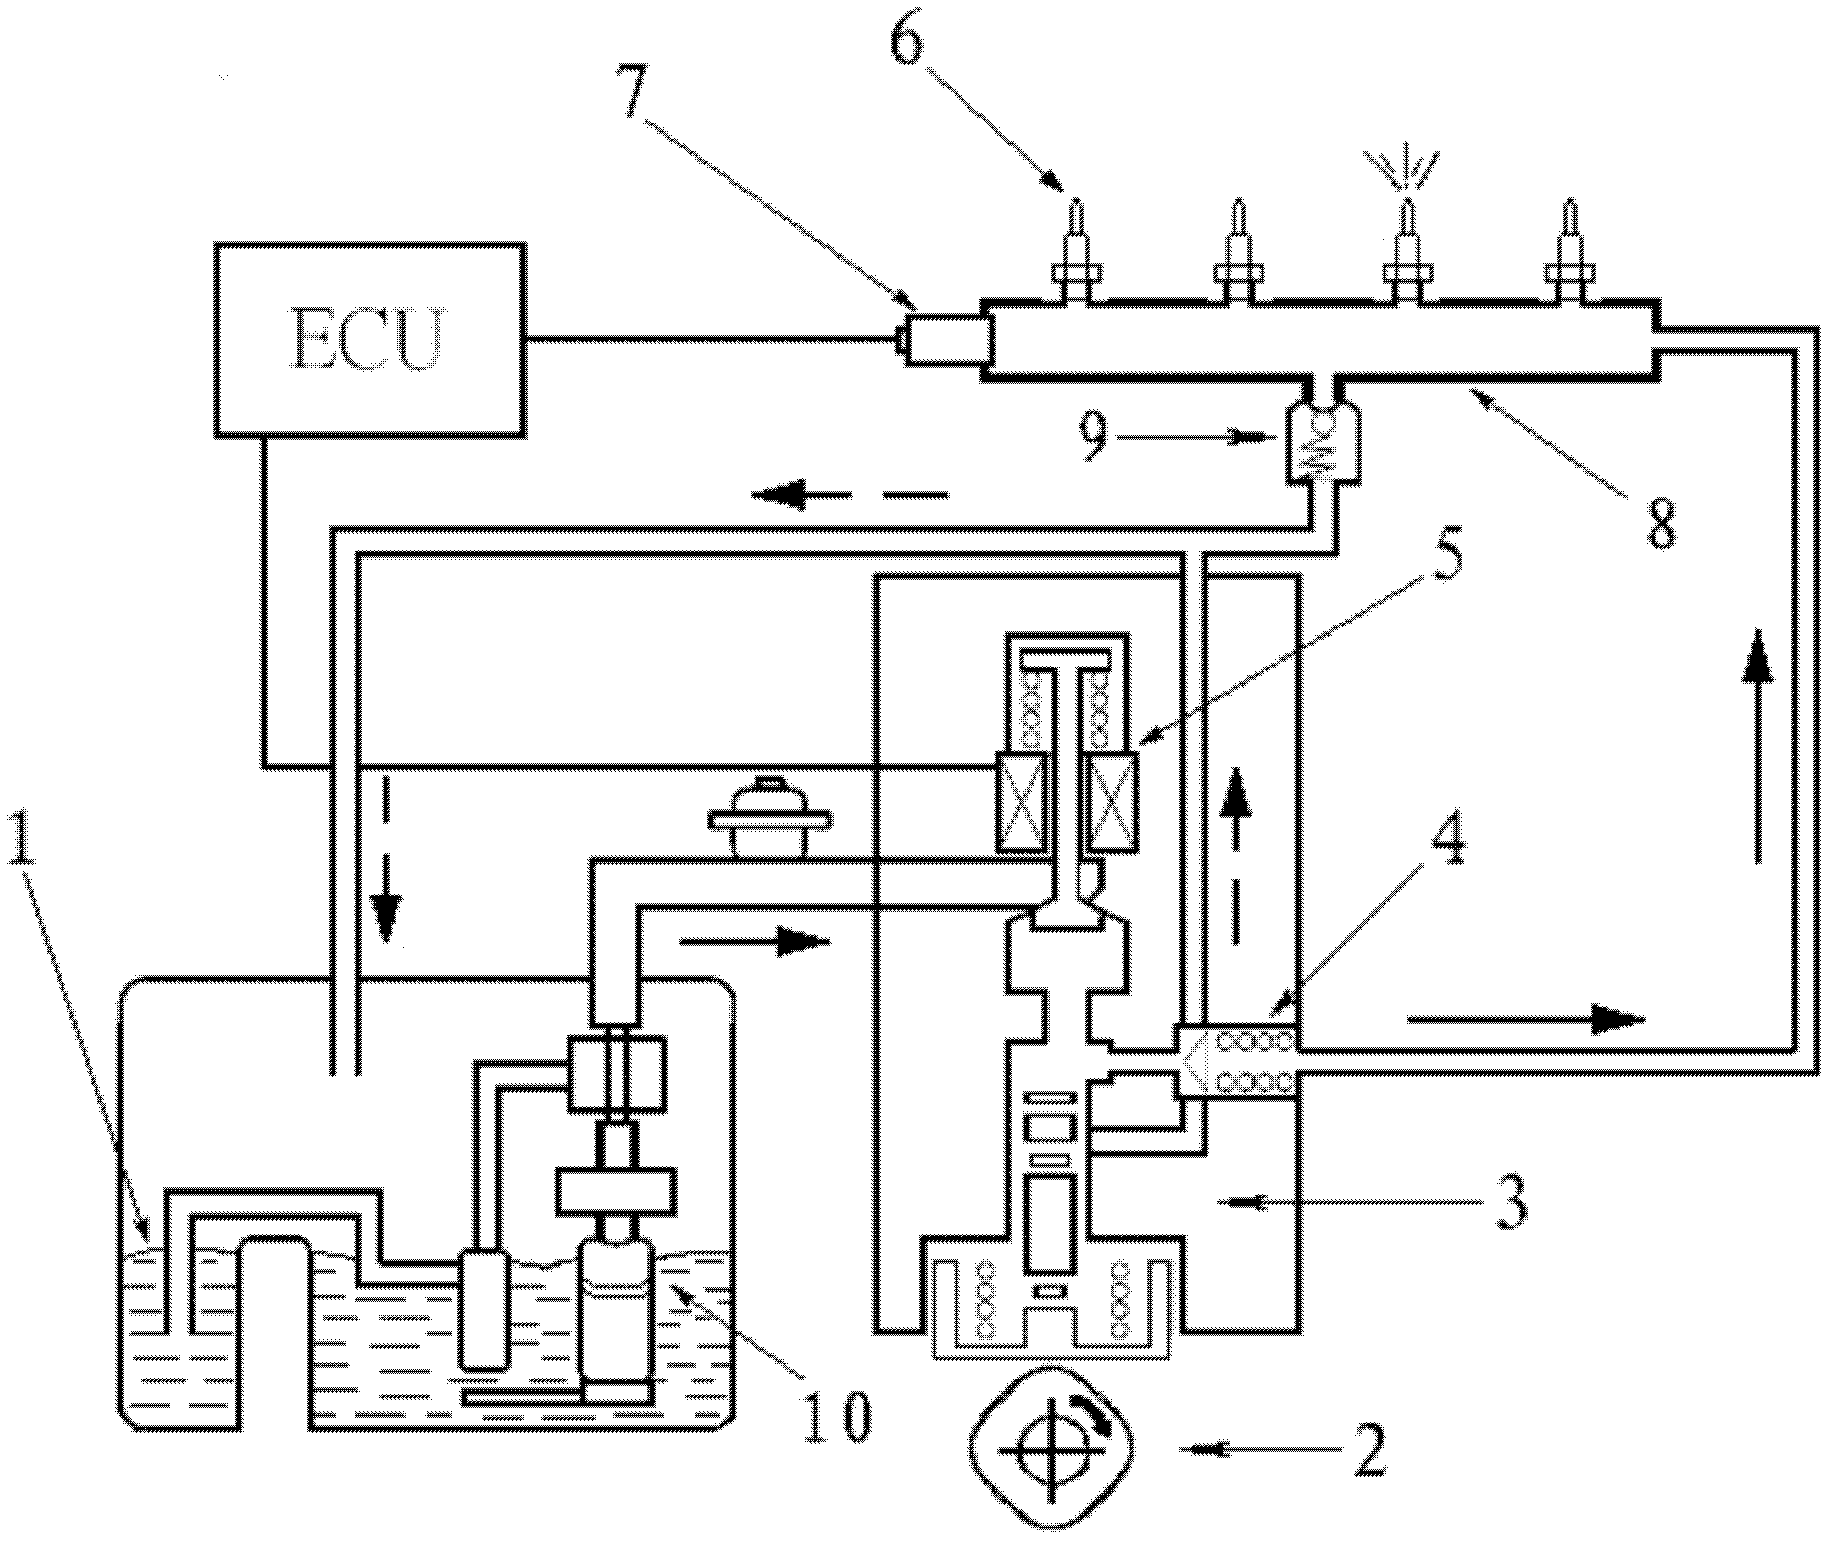 Rail pressure control method for gasoline direct injection engine common rail fuel system